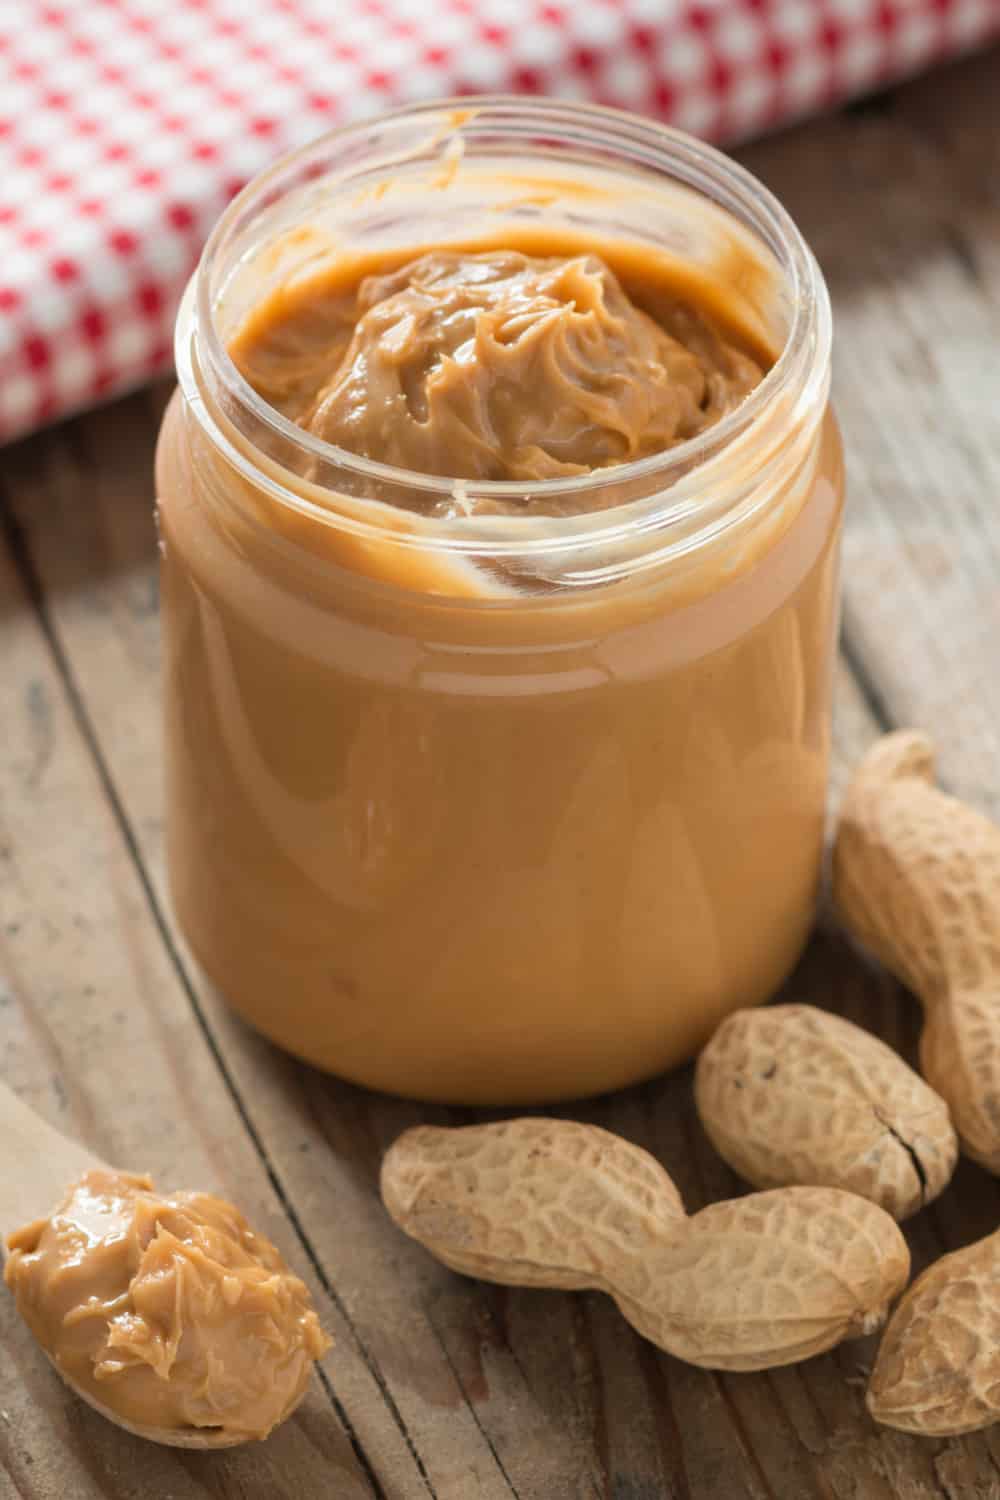 Does Peanut Butter Go Bad How Long Does It Last